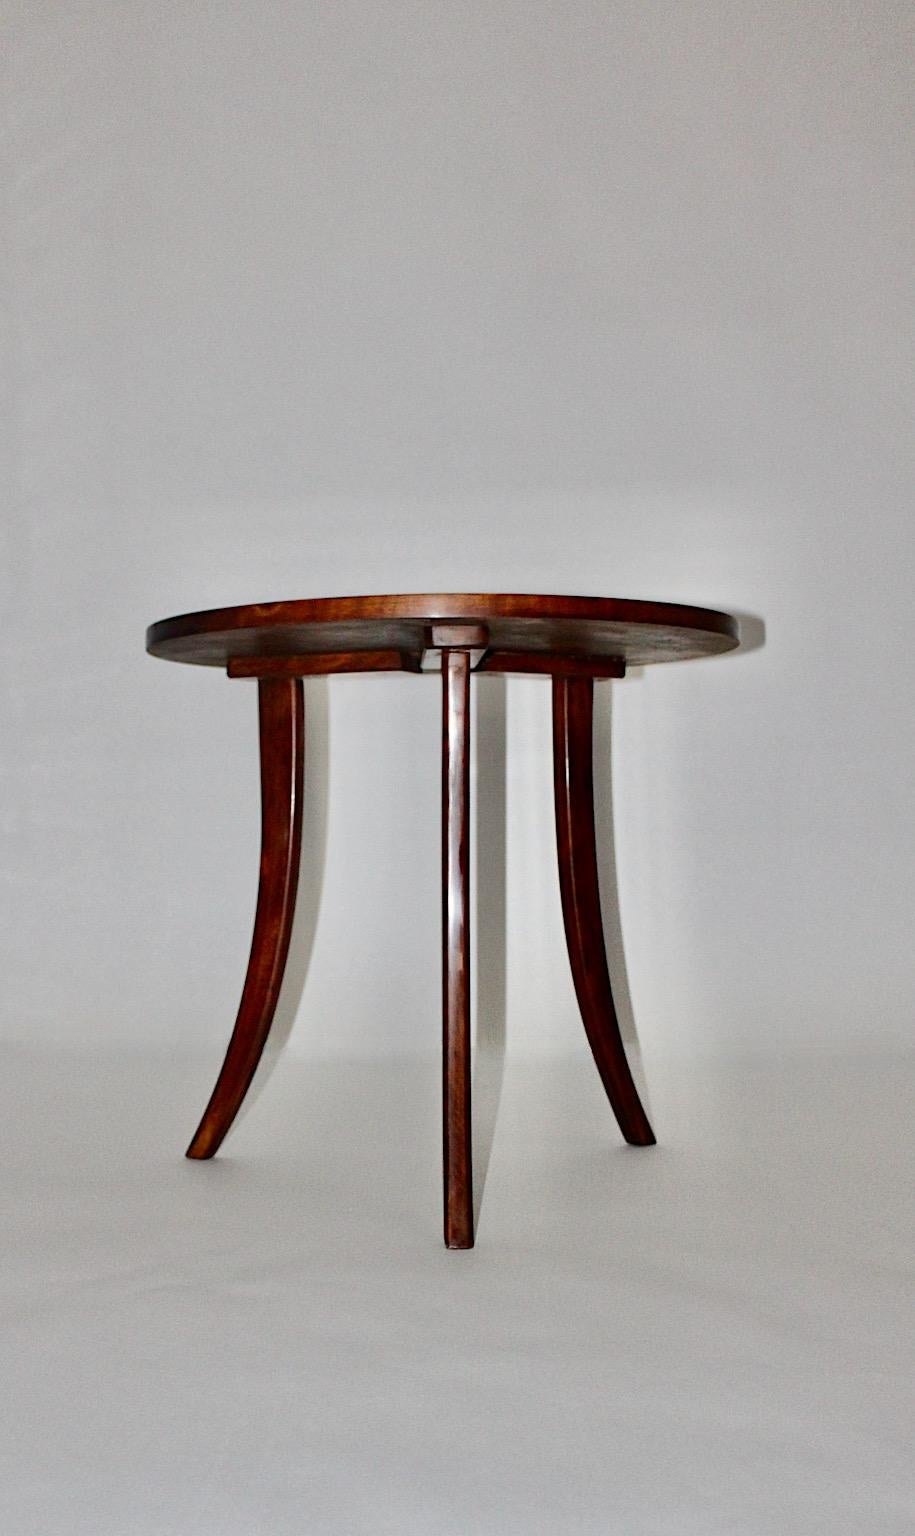 Art Deco Walnut Brown Vintage Coffee Table Side Table Josef Frank, 1930s, Vienna For Sale 1